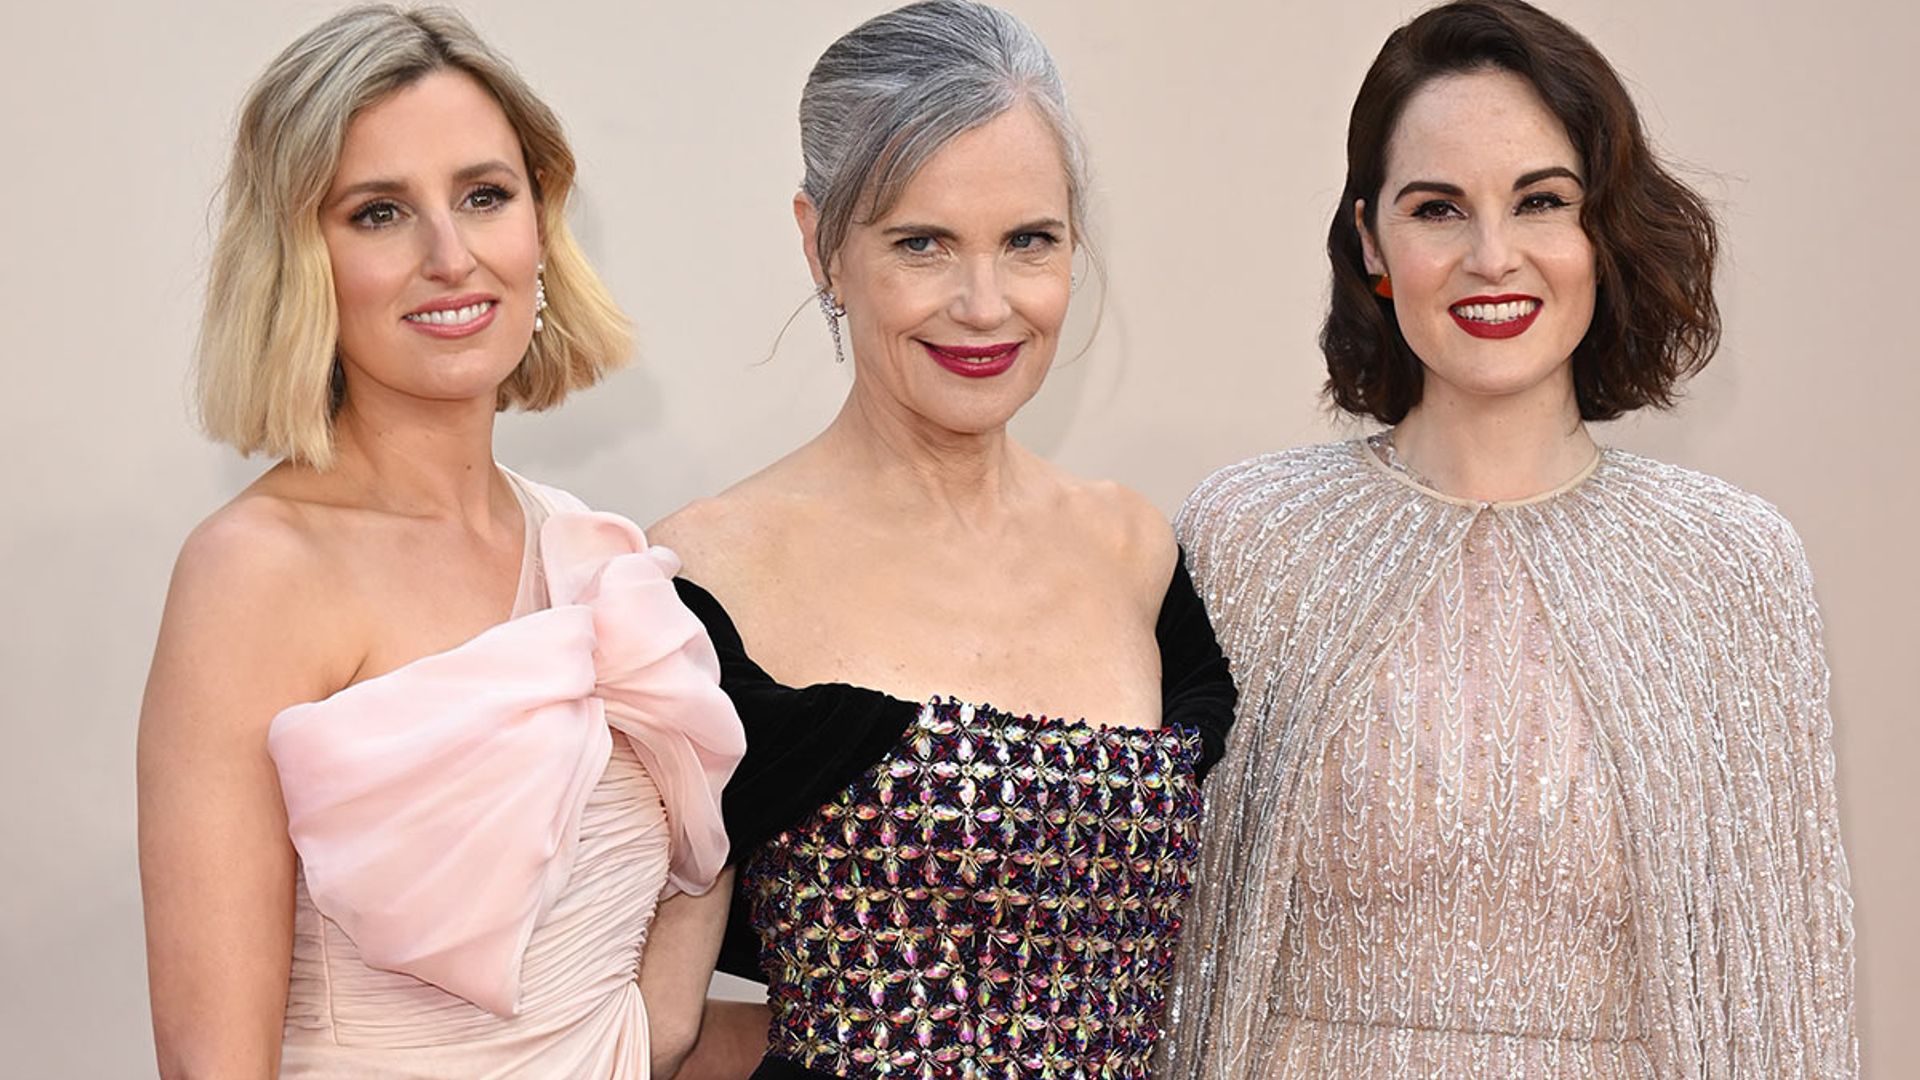 Downton Divas! The best dressed stars from the premiere you can't afford to miss